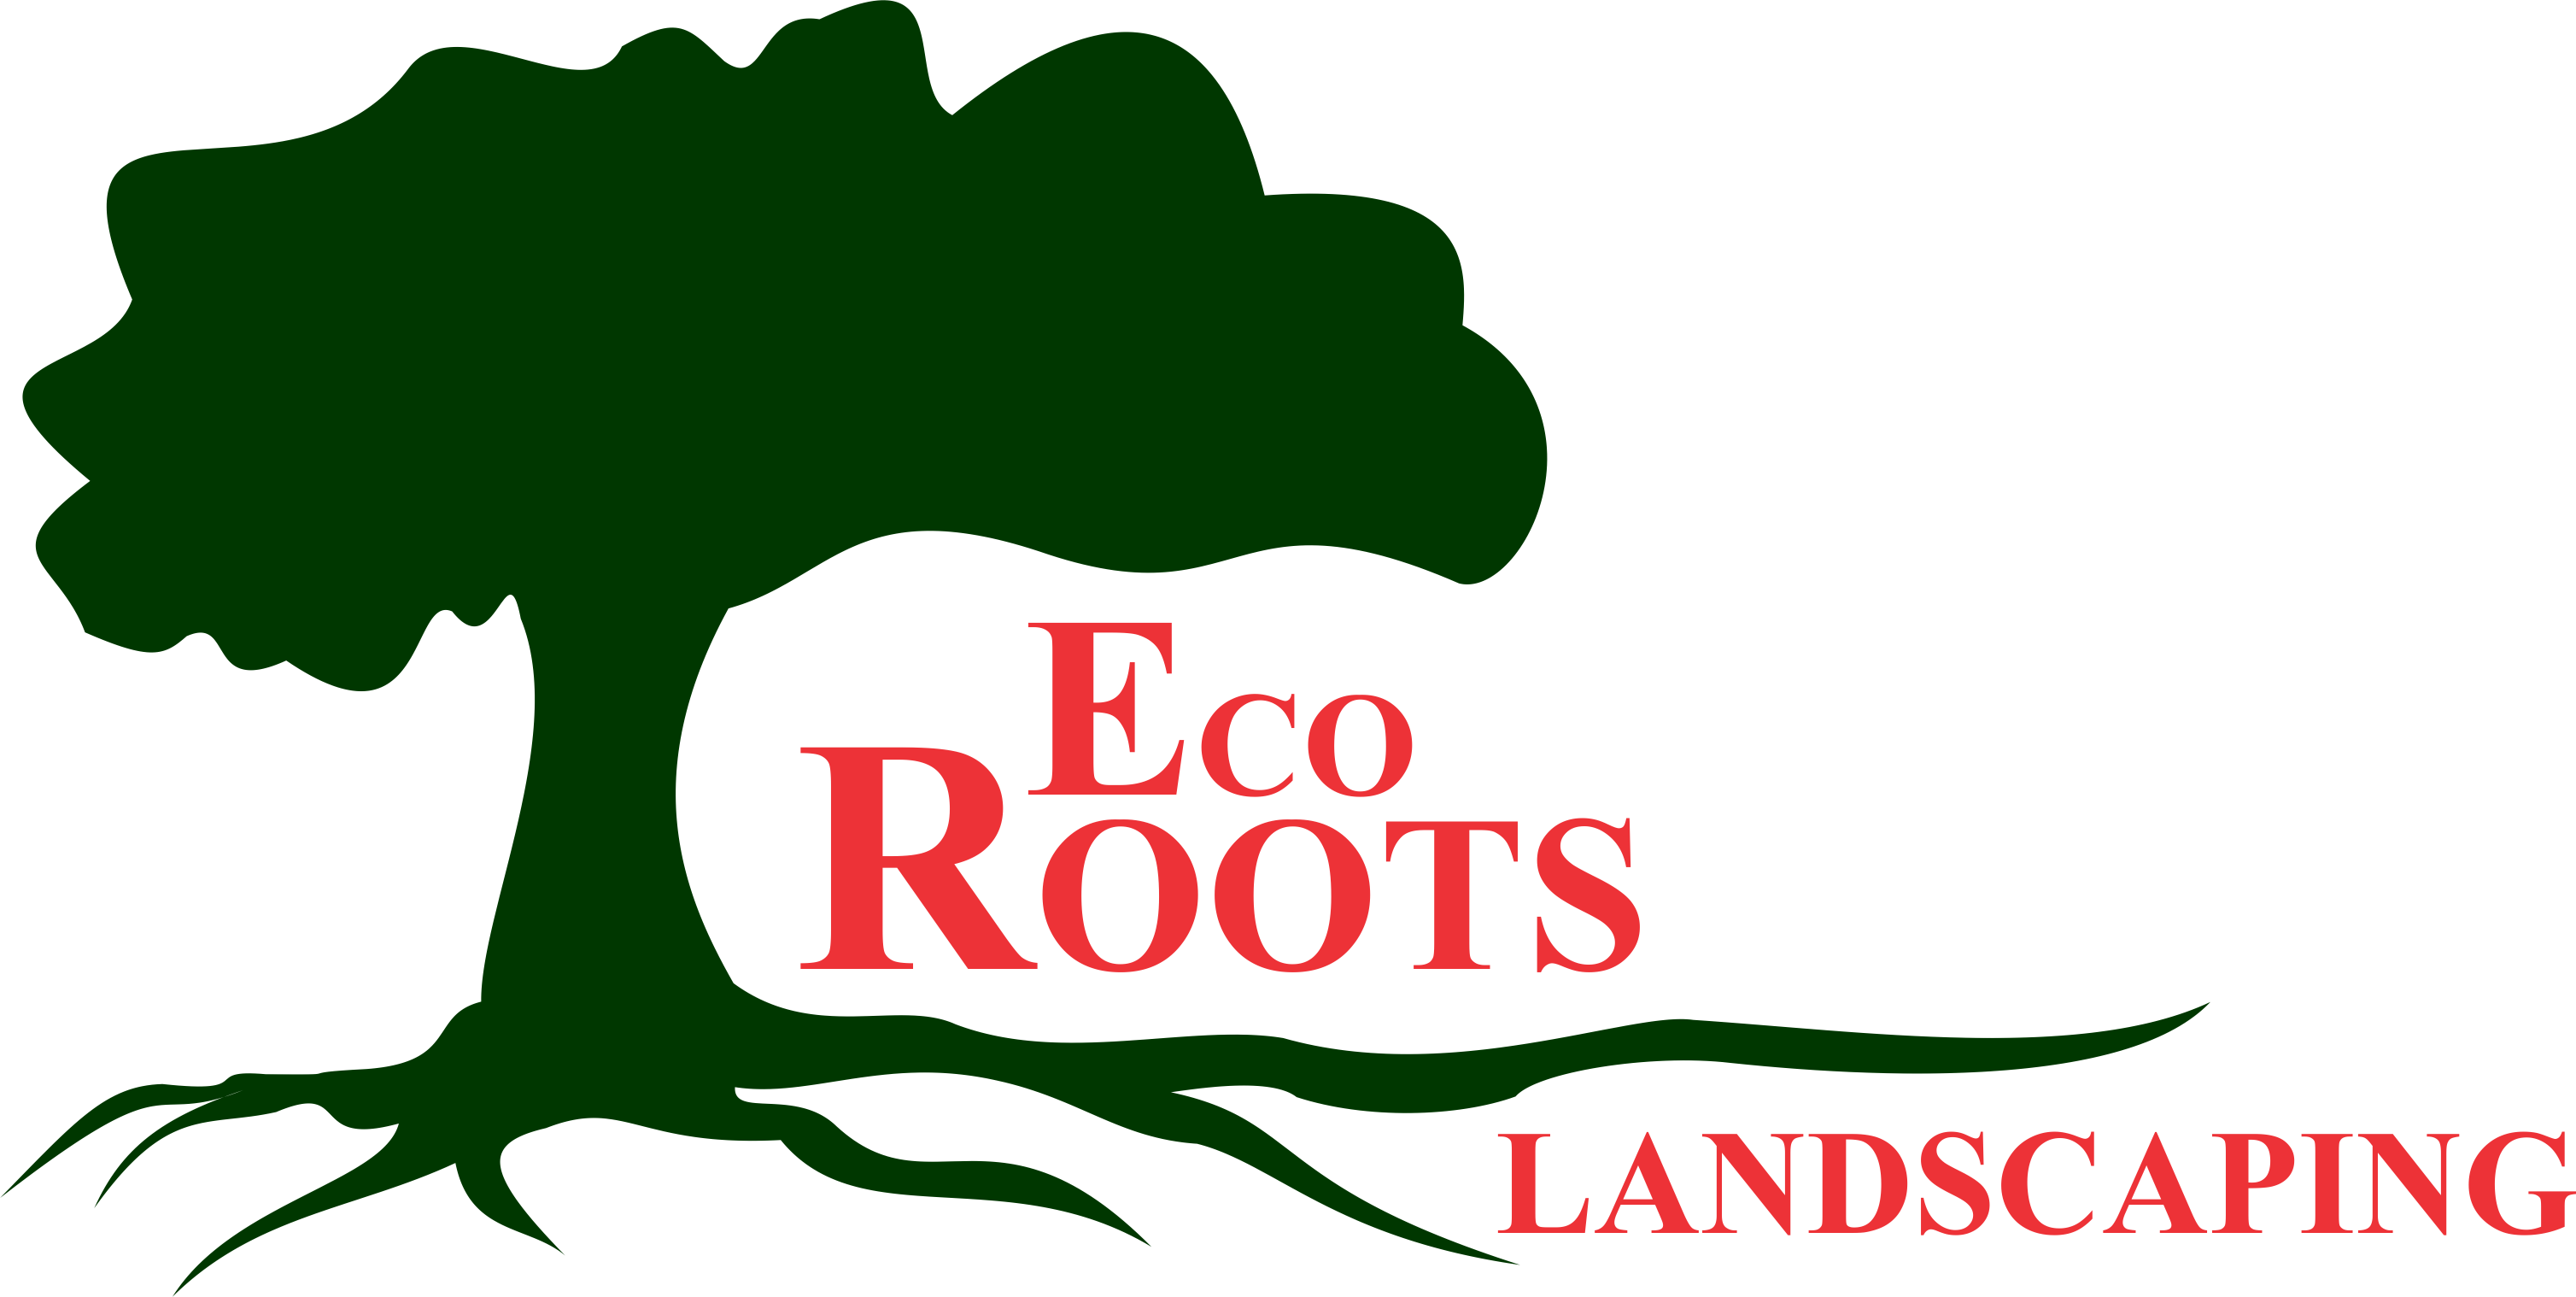 Eco Roots Landscaping